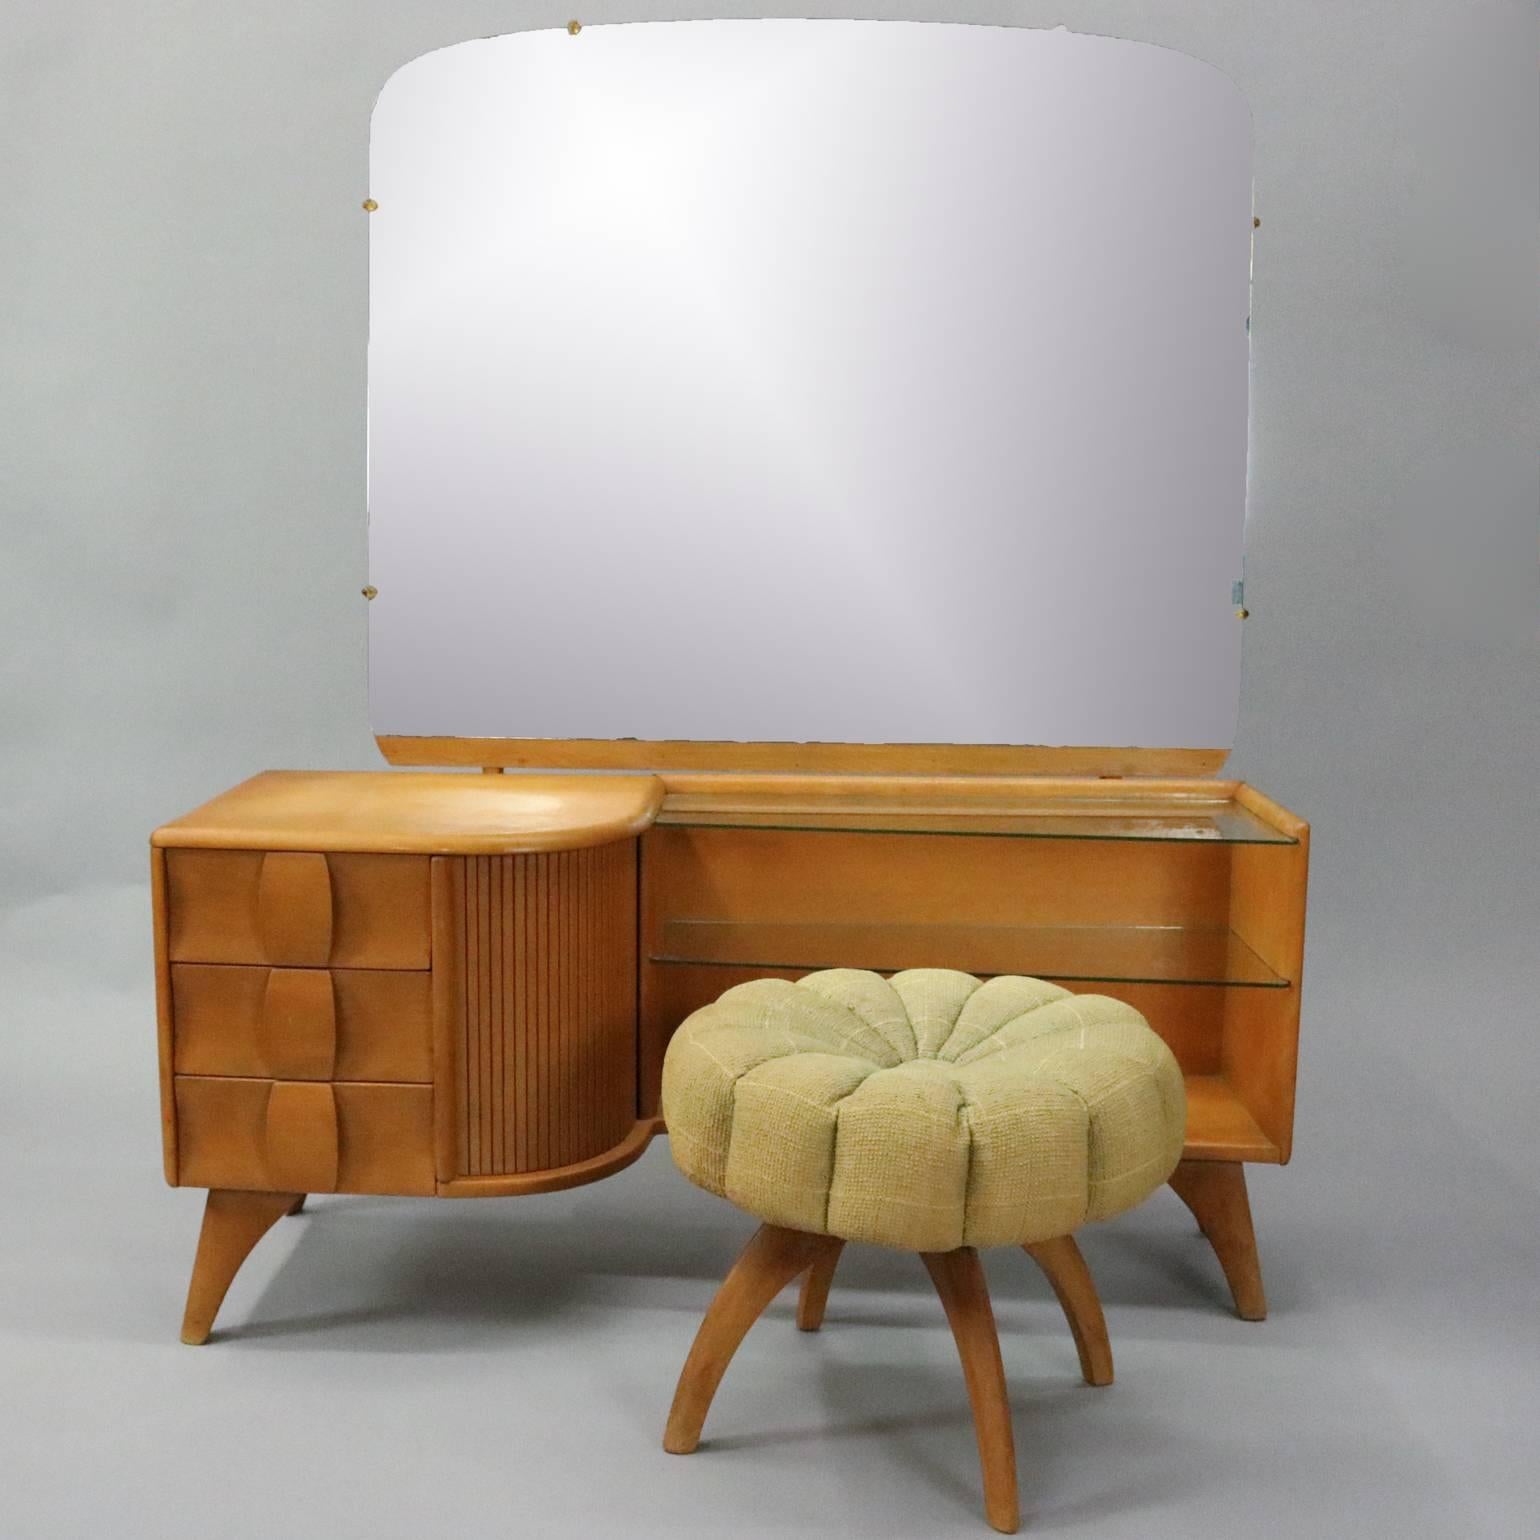 Vintage Heywood-Wakefield Kohinoor mirrored vanity and stool features northern yellow birch wood construction designed by Ernest Herman, circa 1950.

Matching bed, high chest and double dresser listed separately

Measures: 60.5" H x